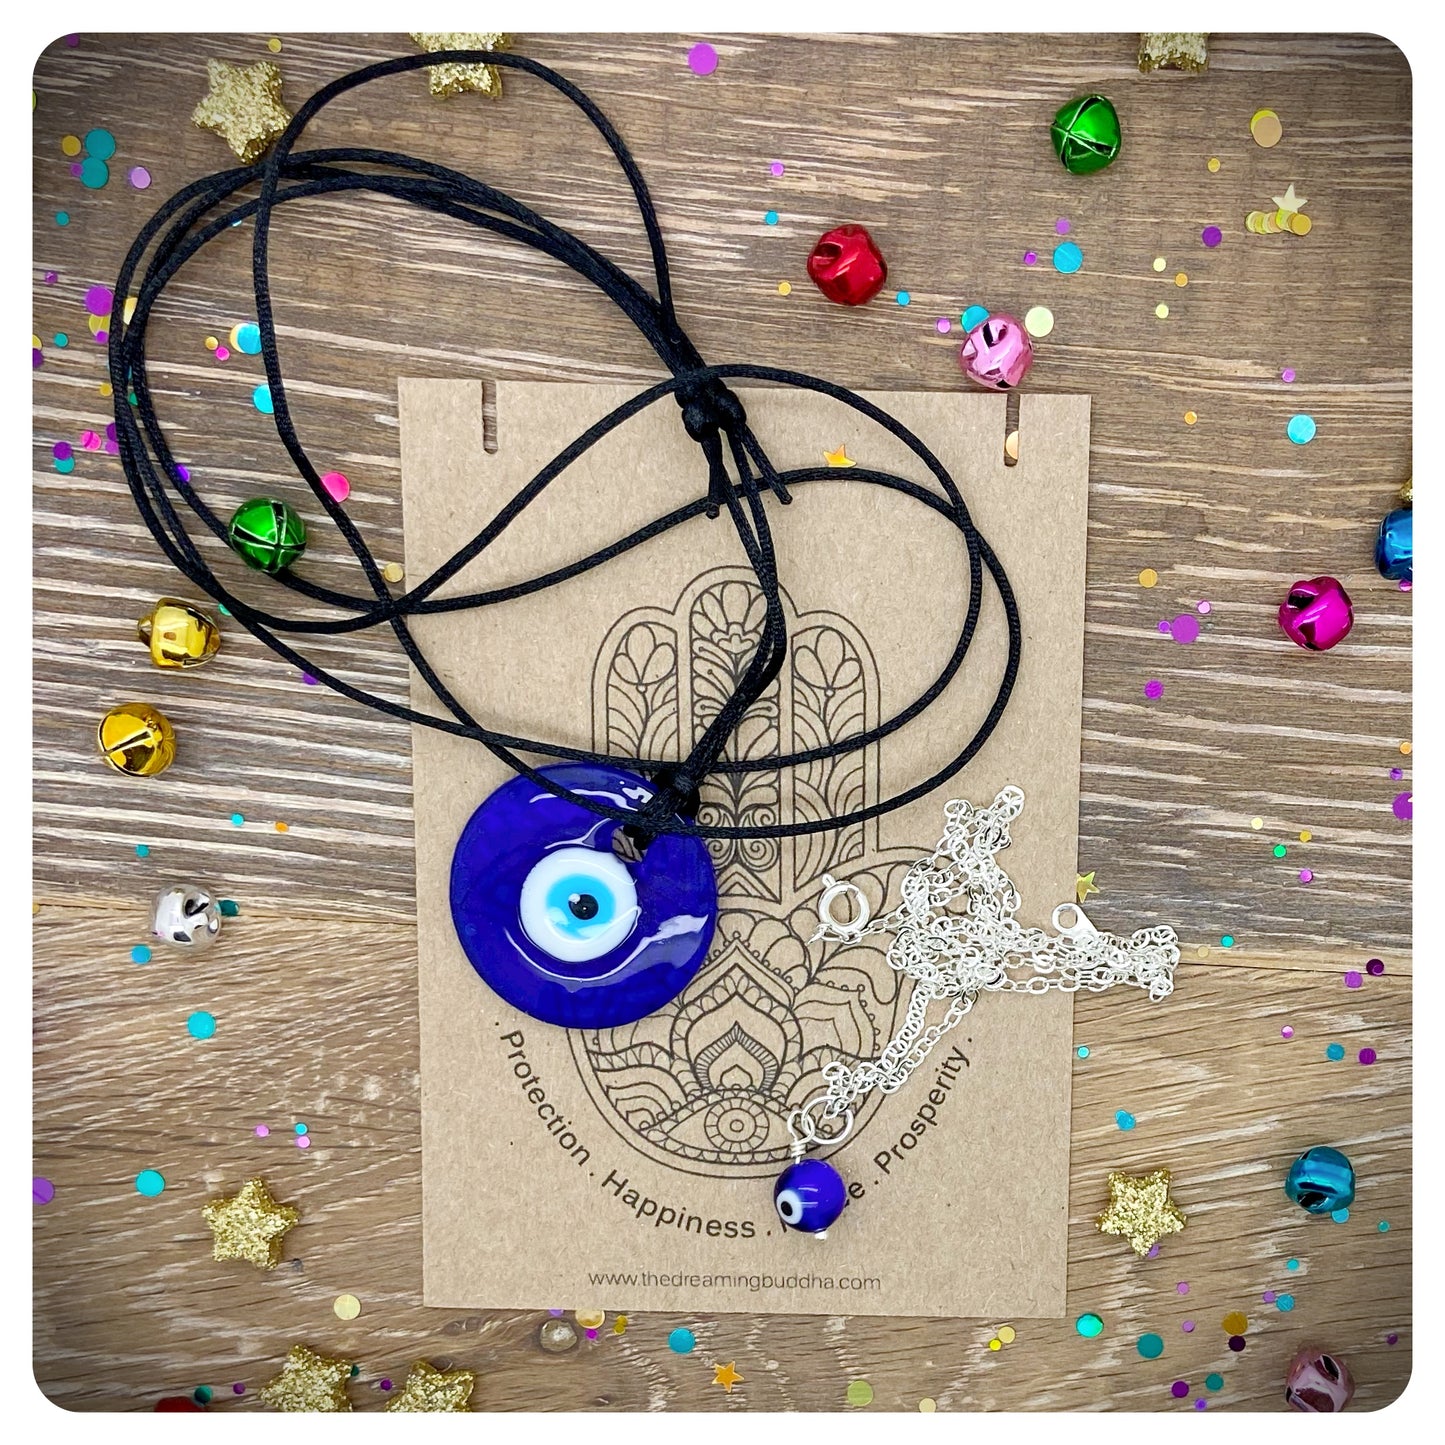 2 Glass Evil Eye Layered Necklaces, Nazar Pendant Bead Necklace Set, Evil Eye Delicate Necklace & Pendant, Protection Jewellery